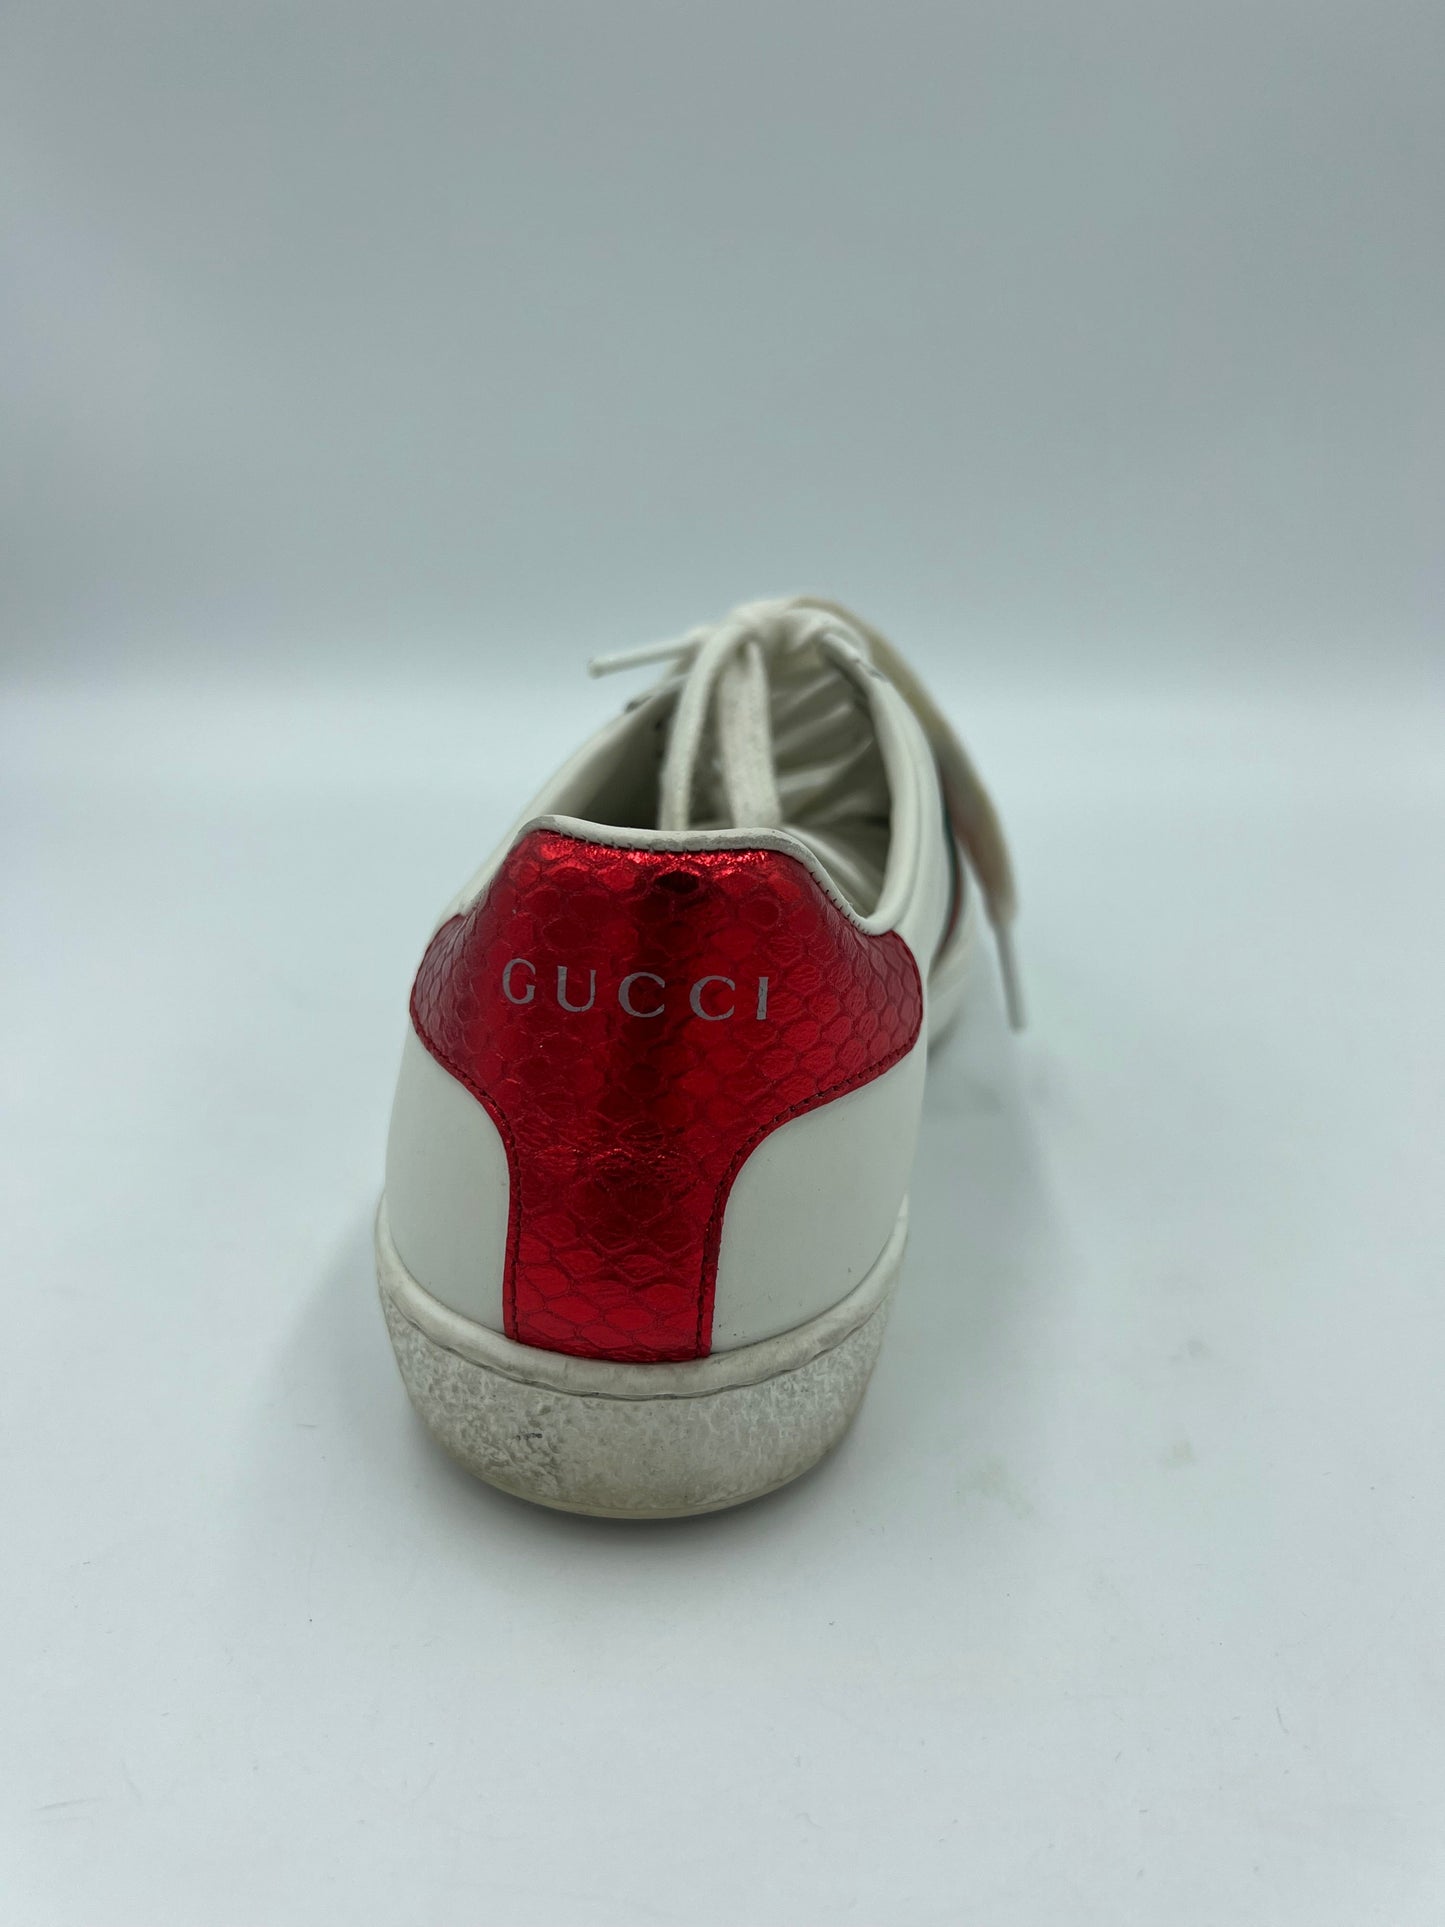 Gucci Ace Bee Sneakers  Size: 6